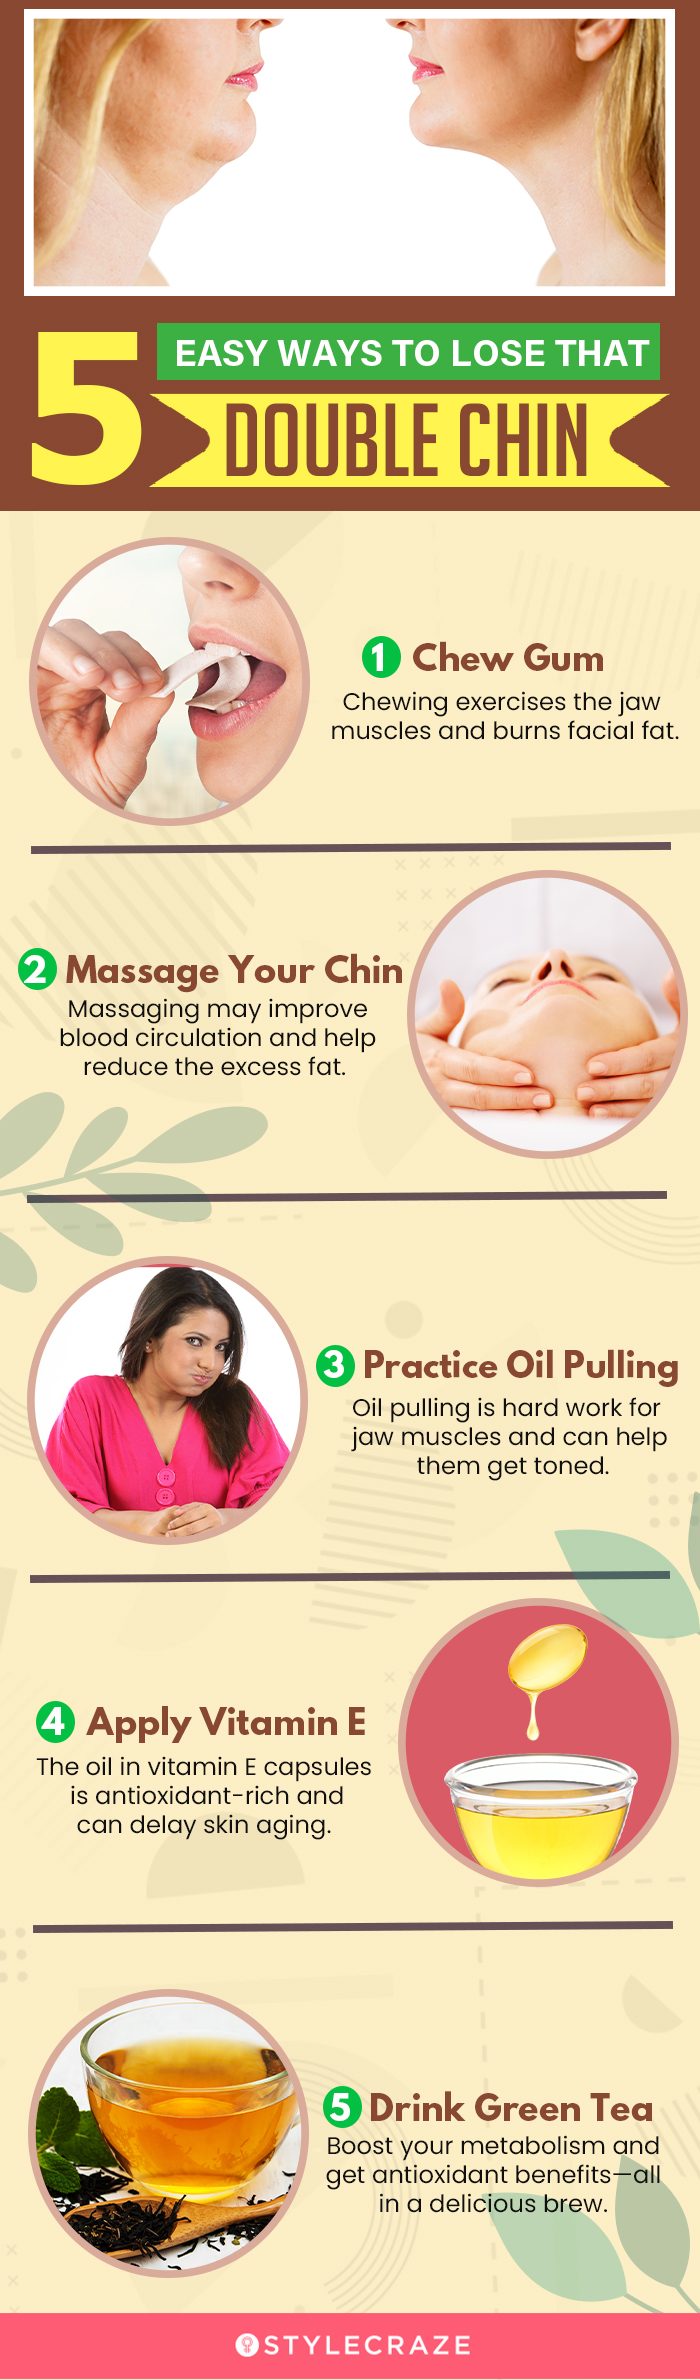 5 easy ways to lose that double chin (infographic)